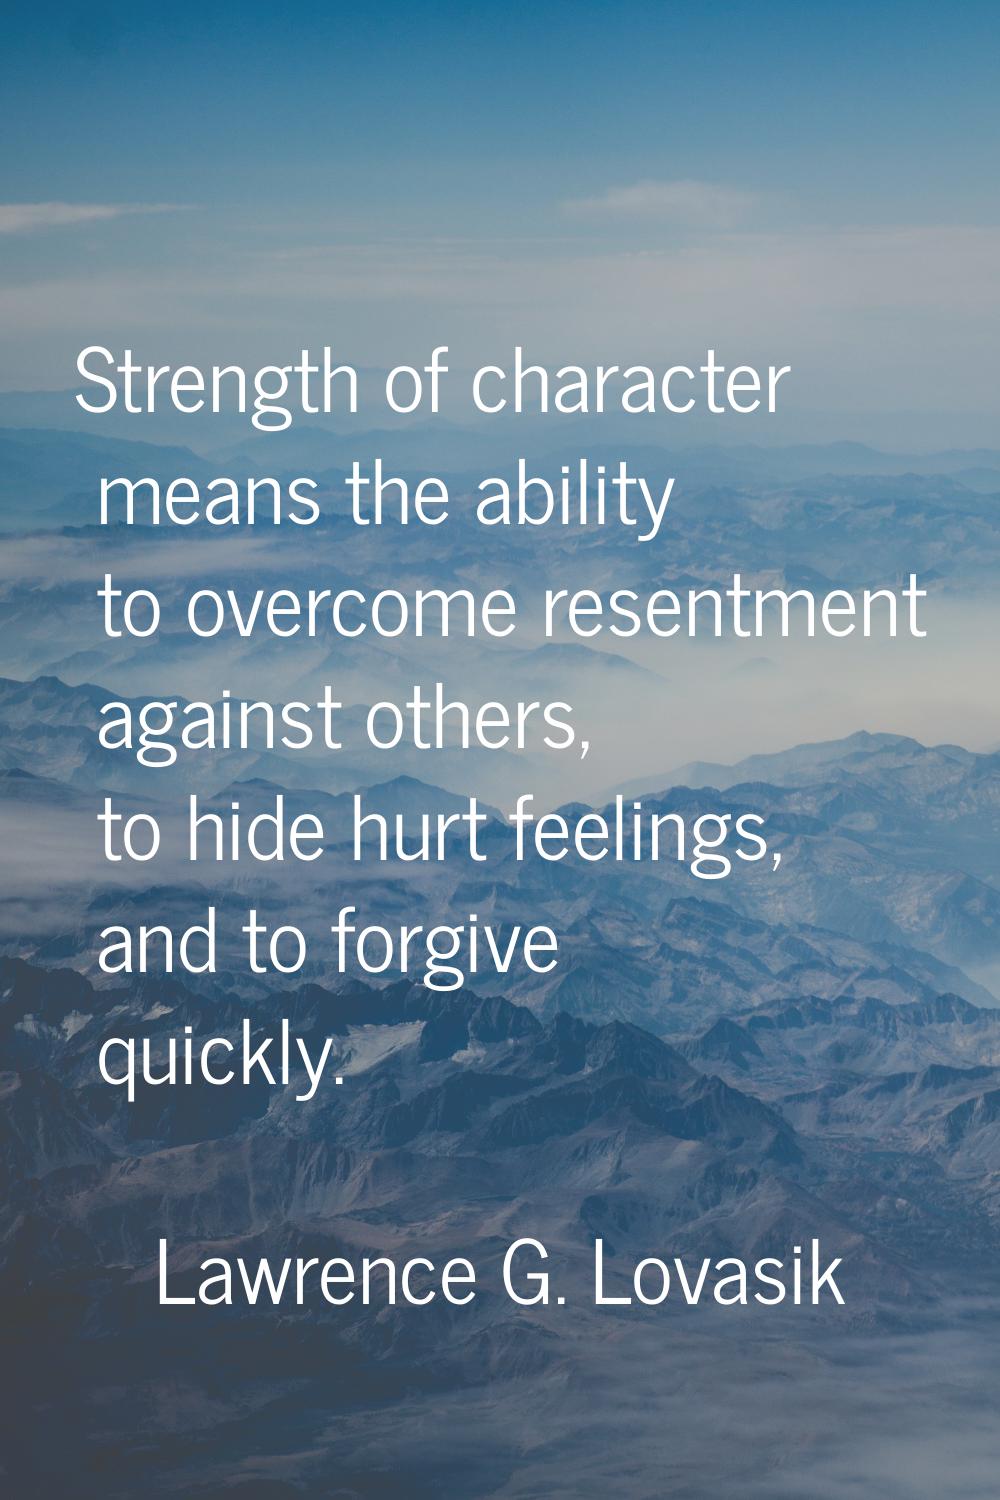 Strength of character means the ability to overcome resentment against others, to hide hurt feeling